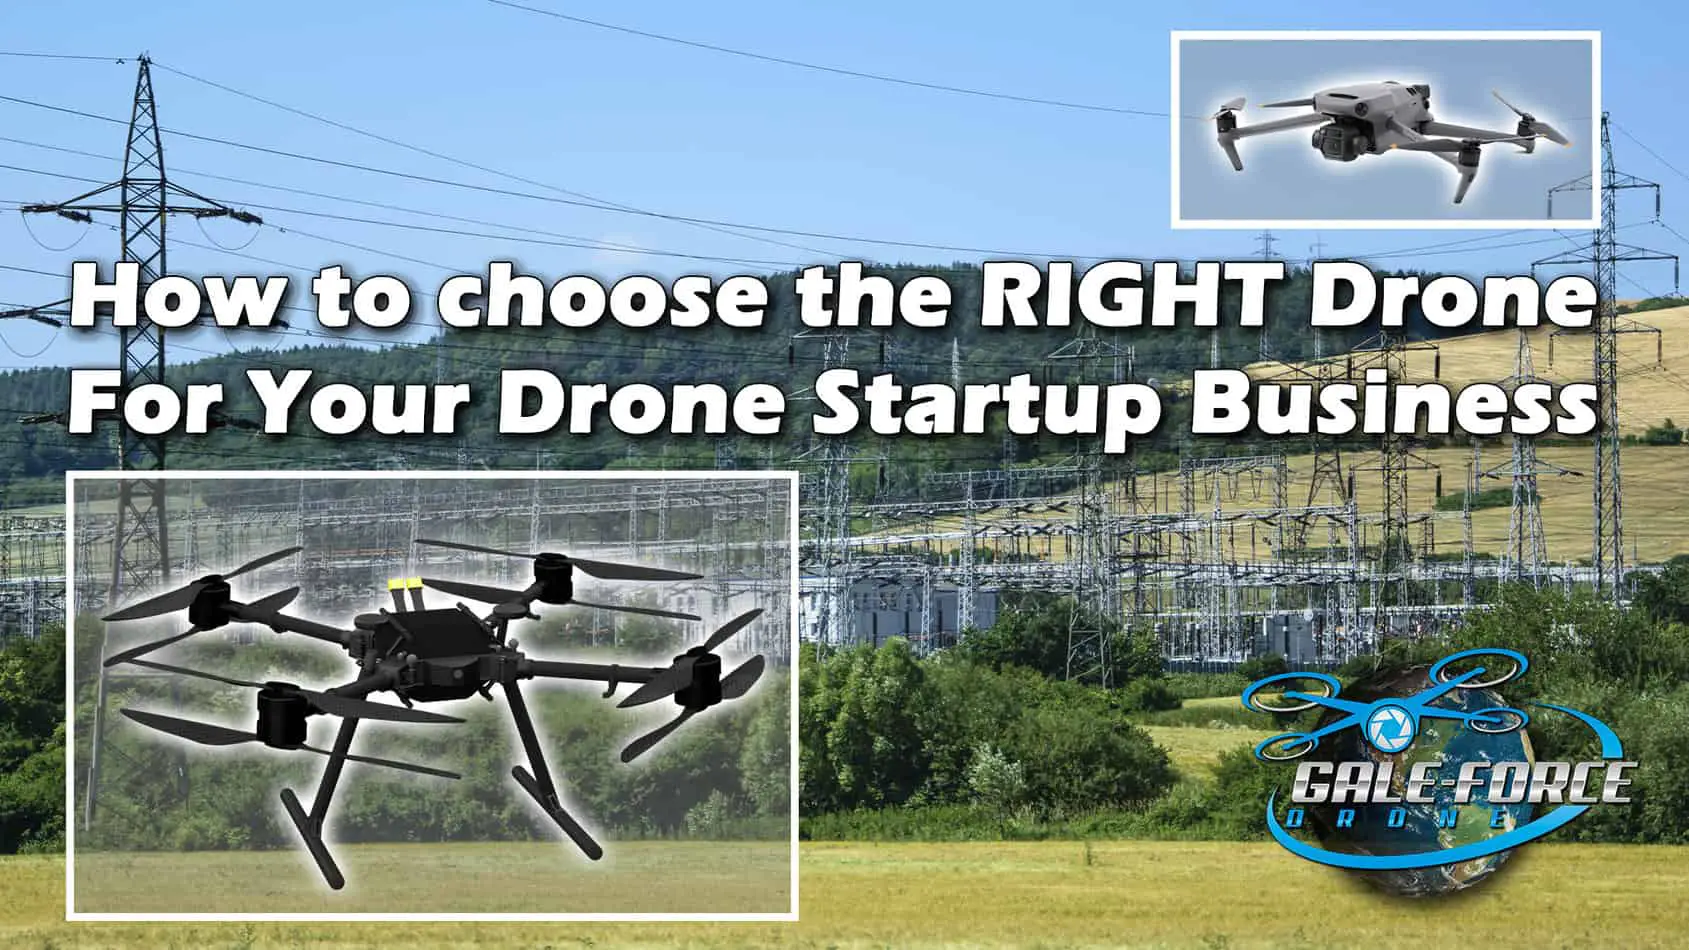 Which DRONE do I need for my Drone Startup Business?